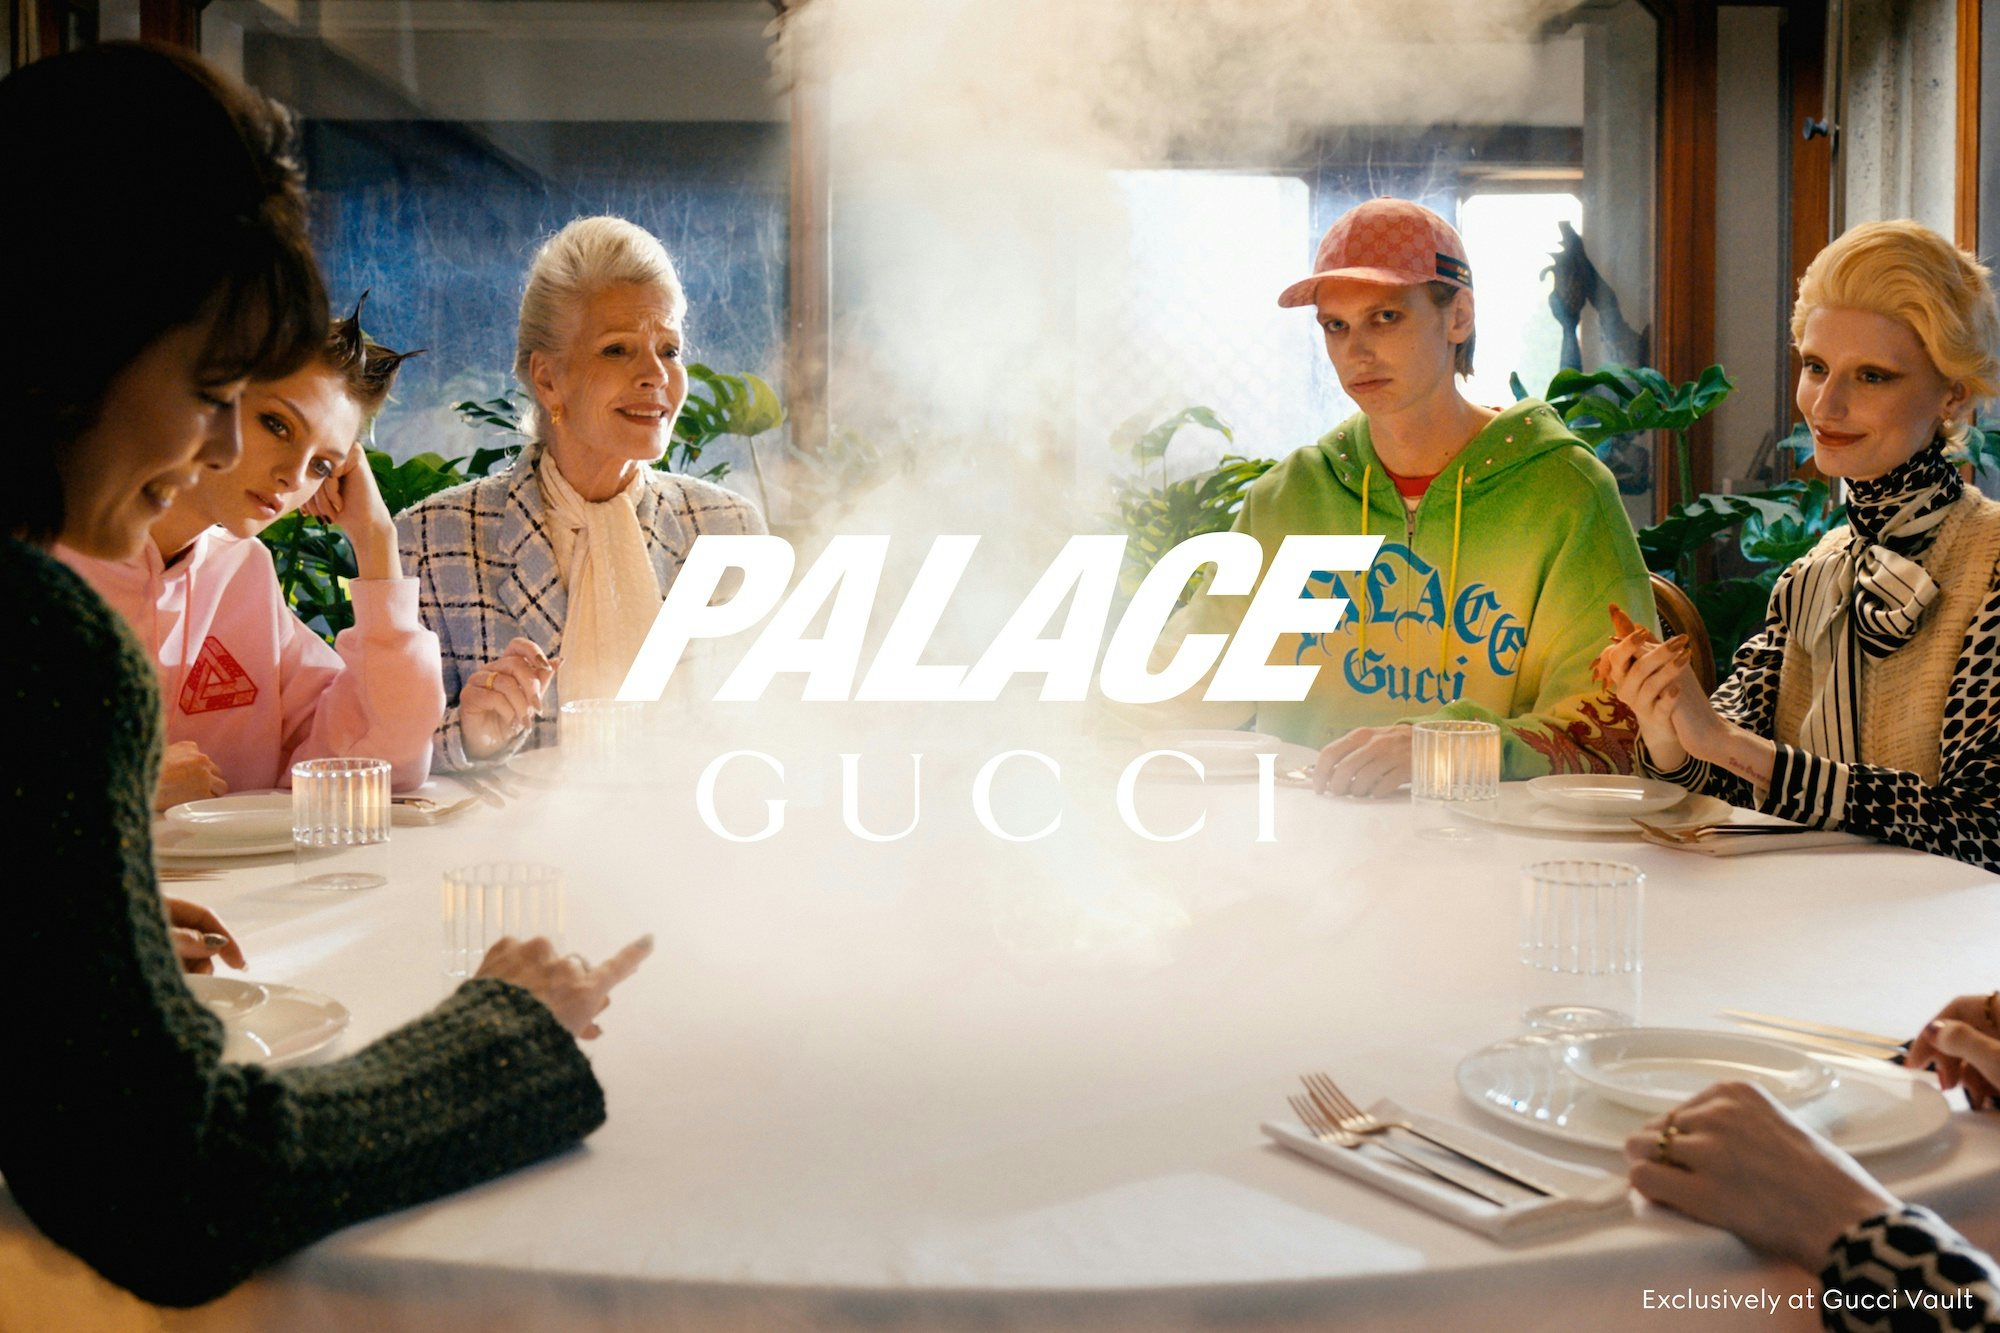 Gucci is forever dropping brand collaborations that overtly cater to young subcultures. Photo: Gucci x Palace